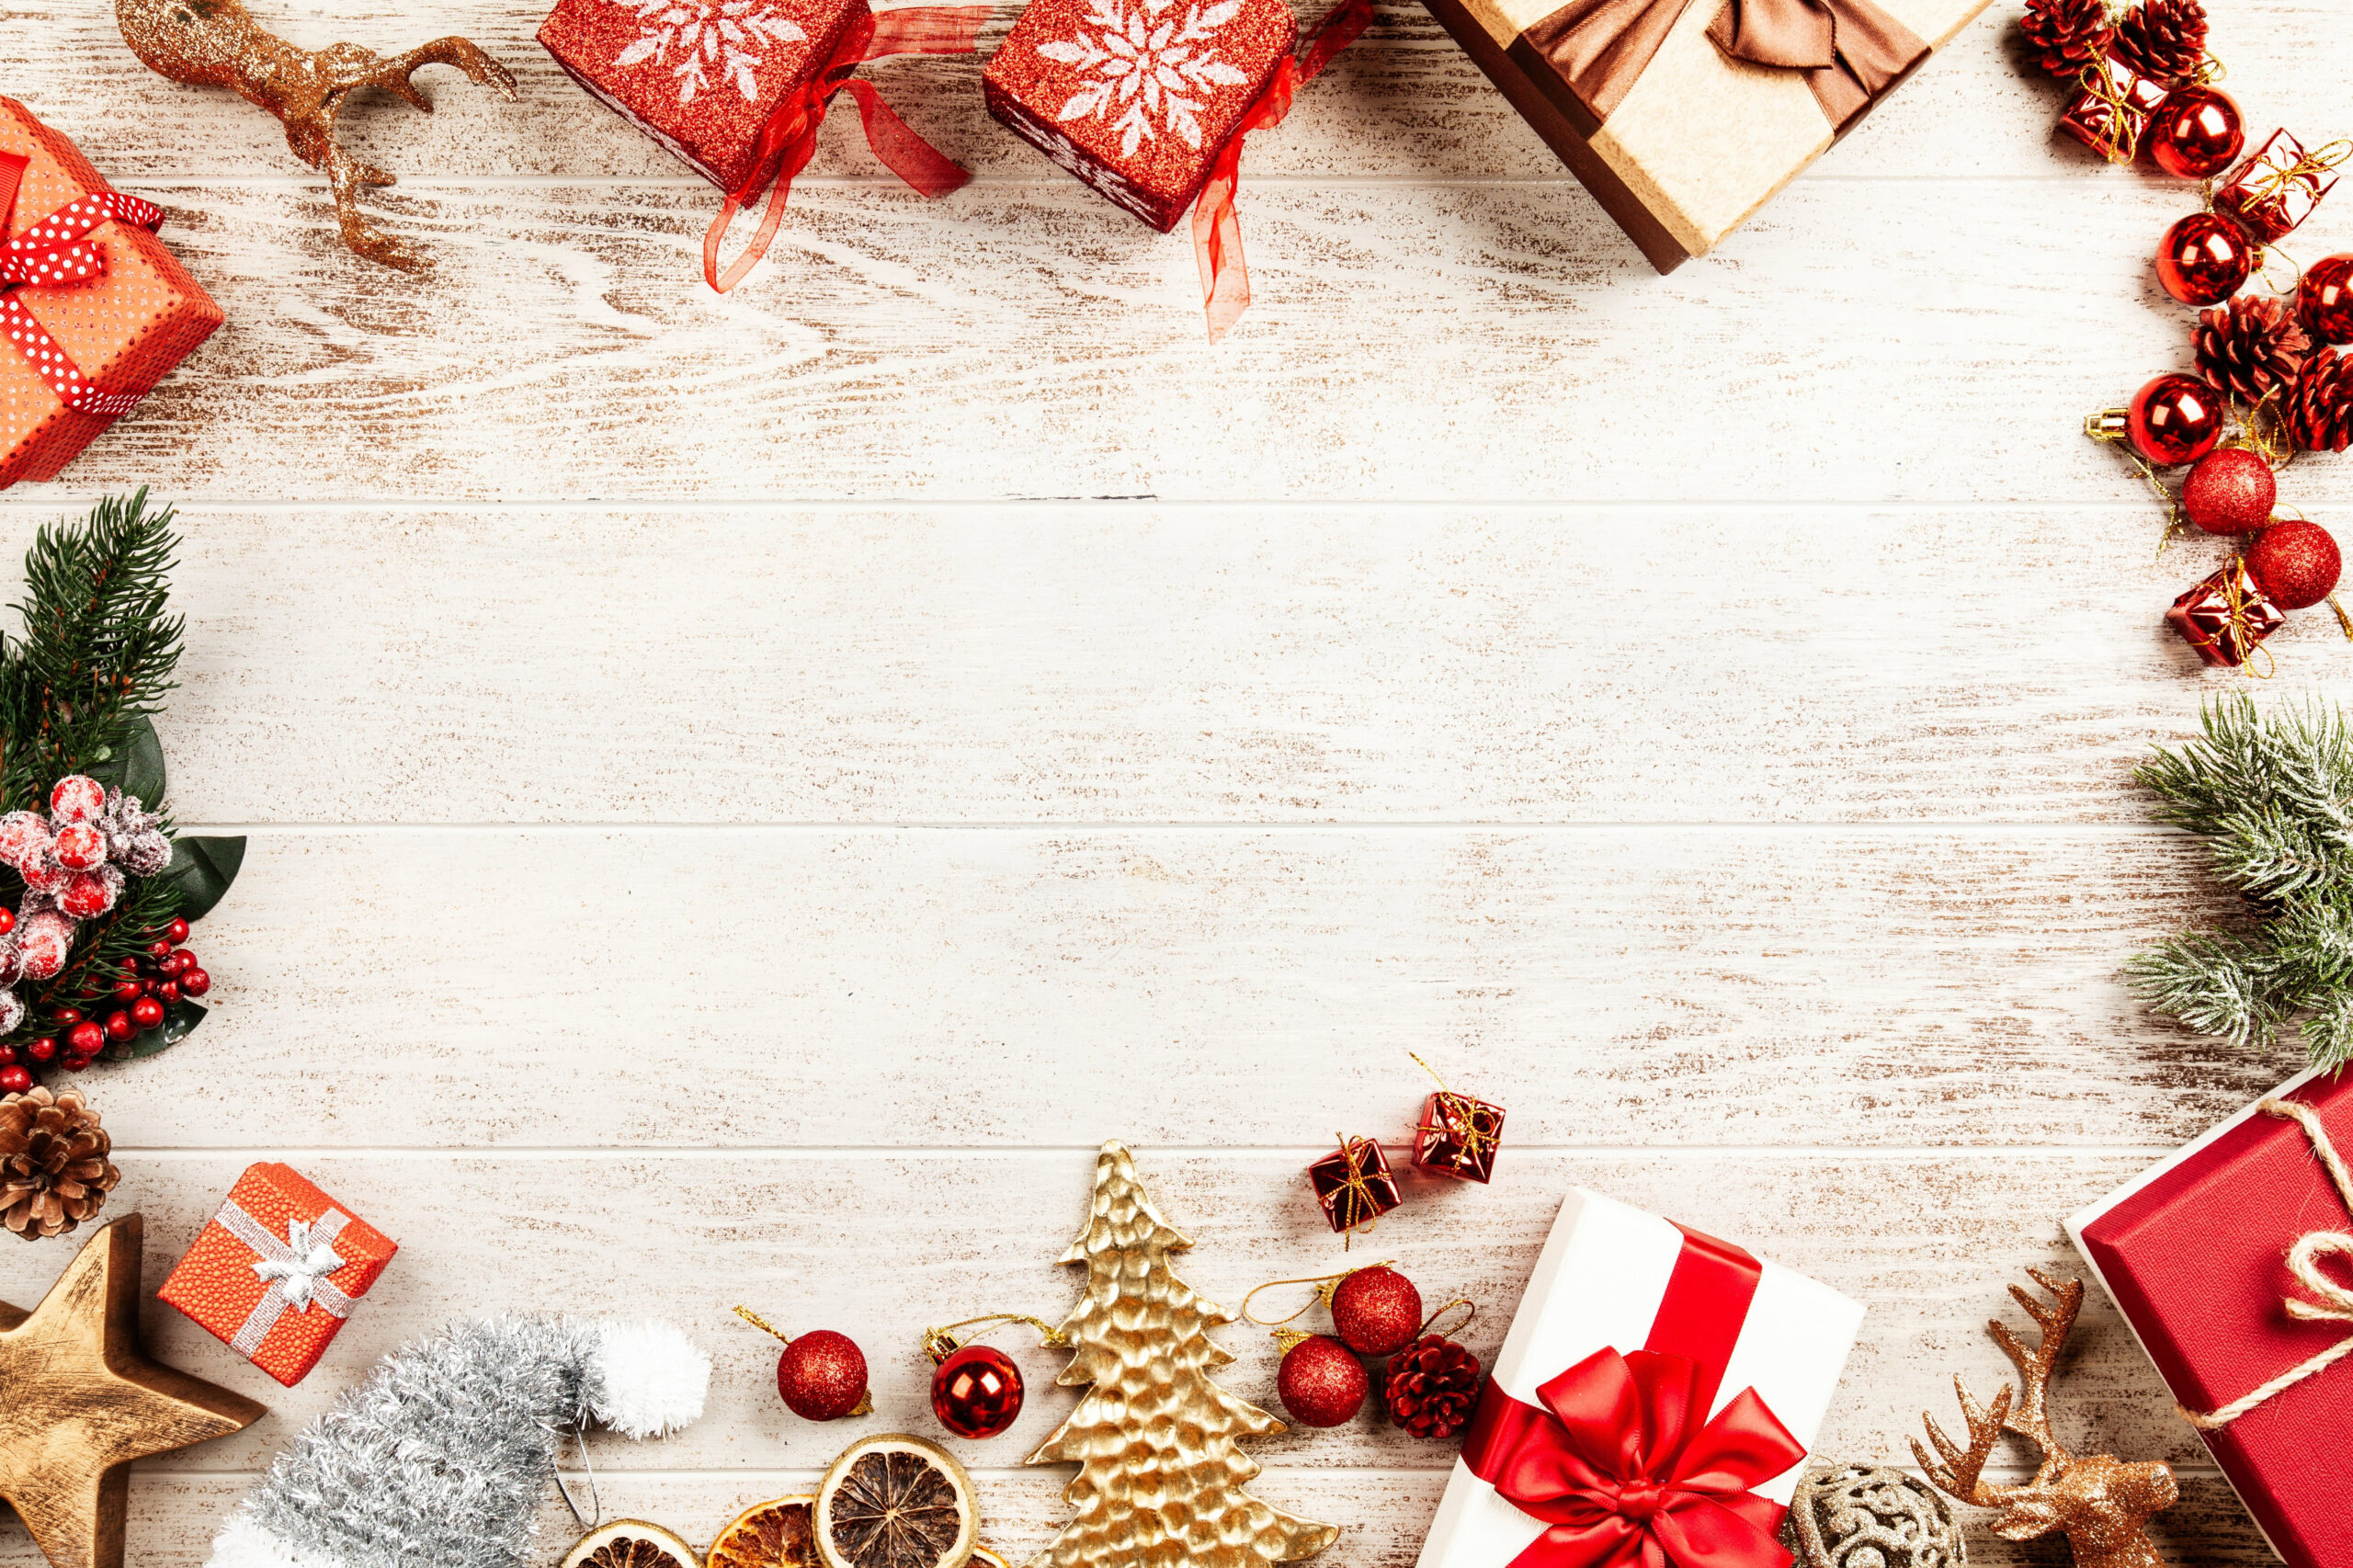 Christmas Background Photos, Download The BEST Free Christmas